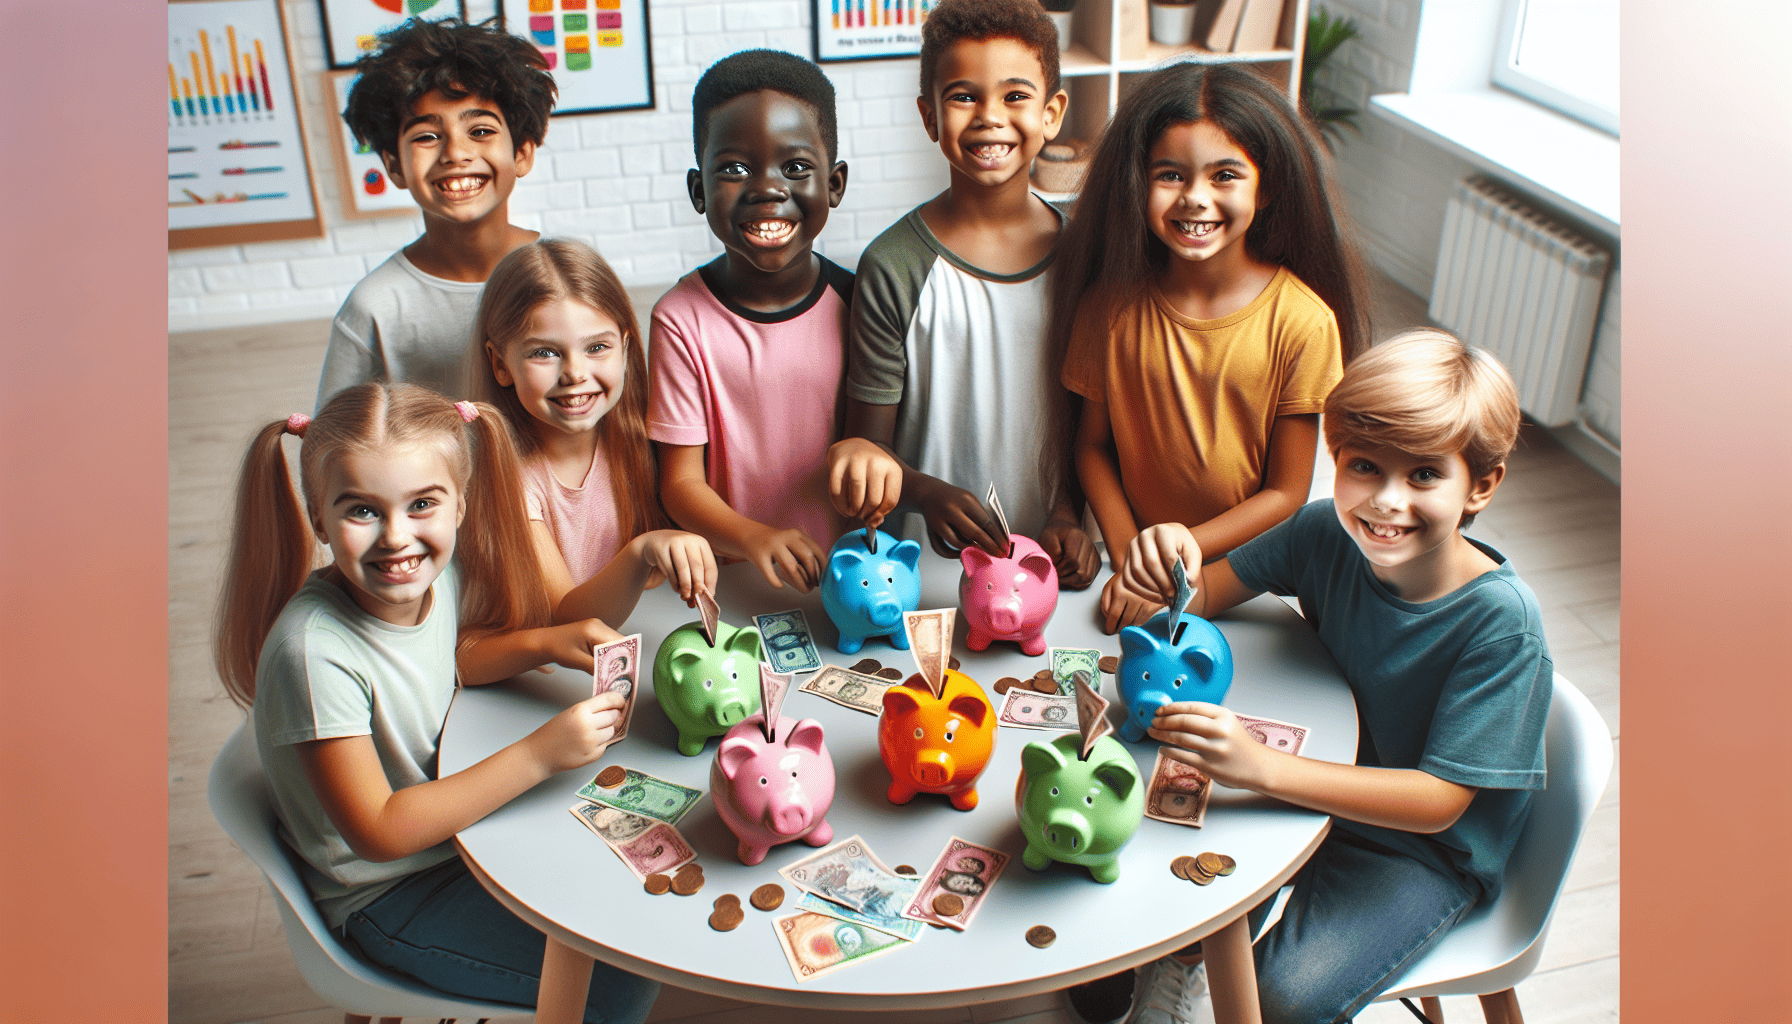 Children learning about saving money